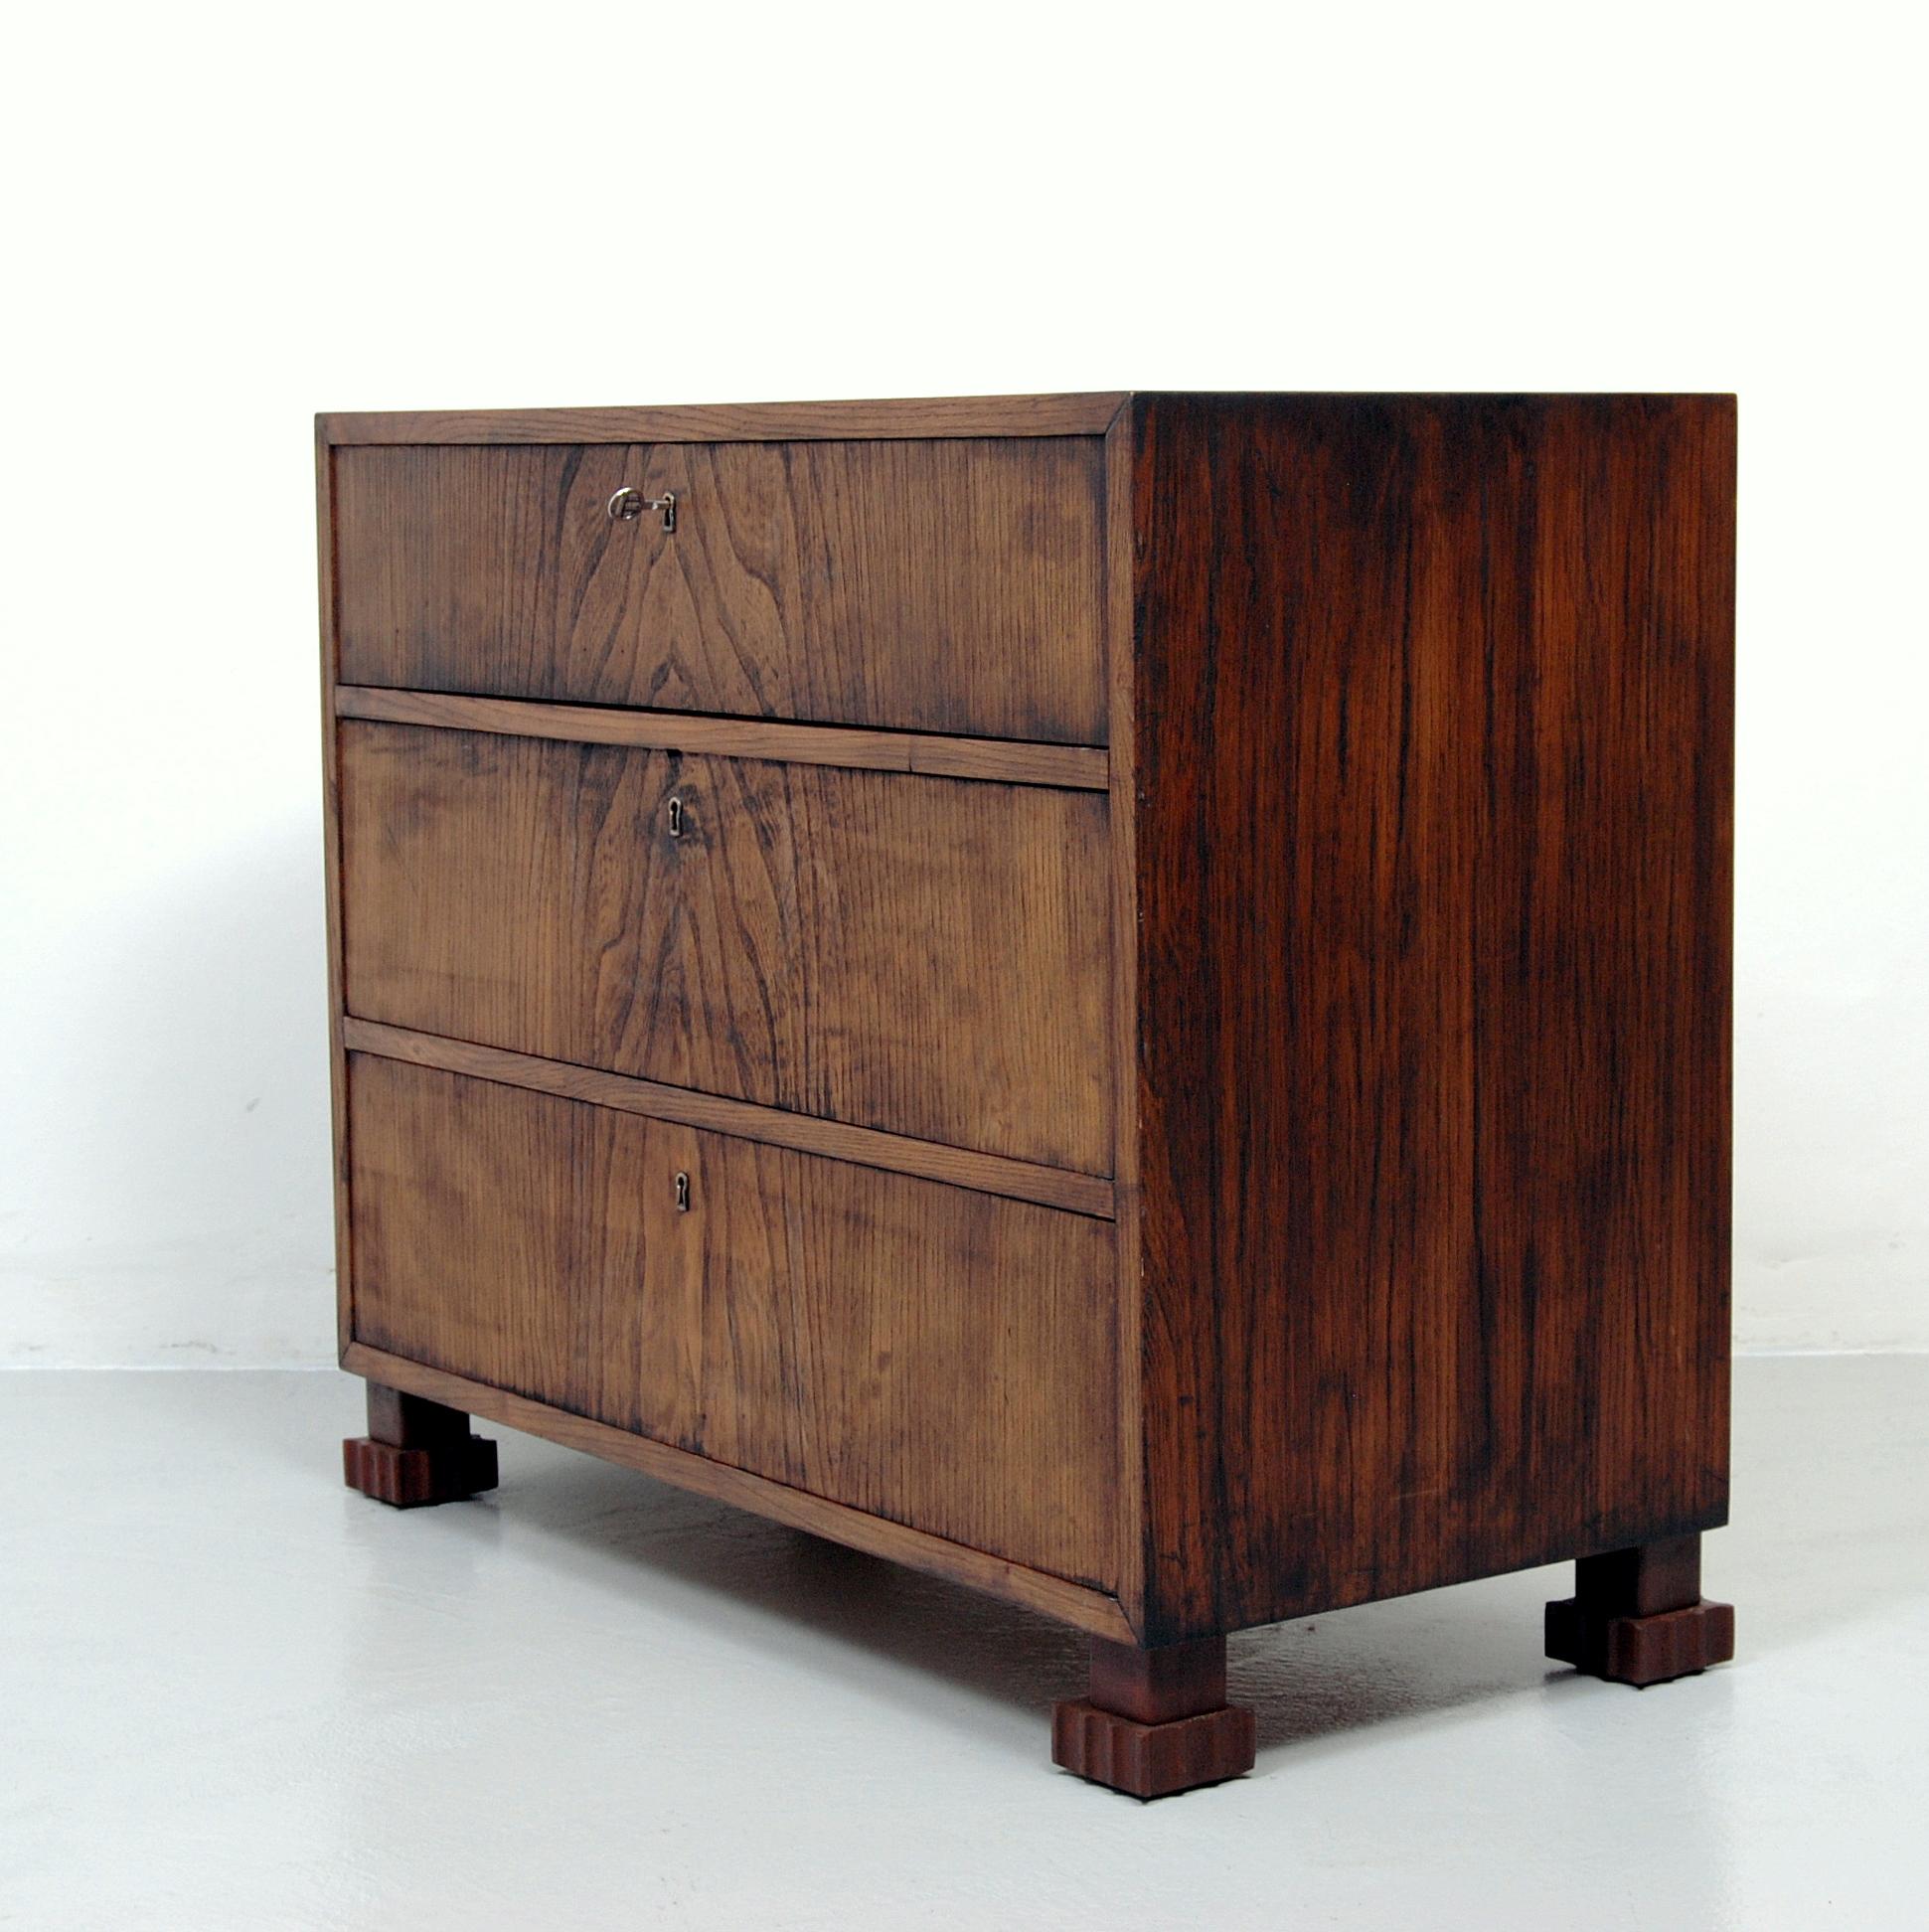 Chest of drawers in the Style of Axel Einar Hjorth, 1940s (Skandinavische Moderne)